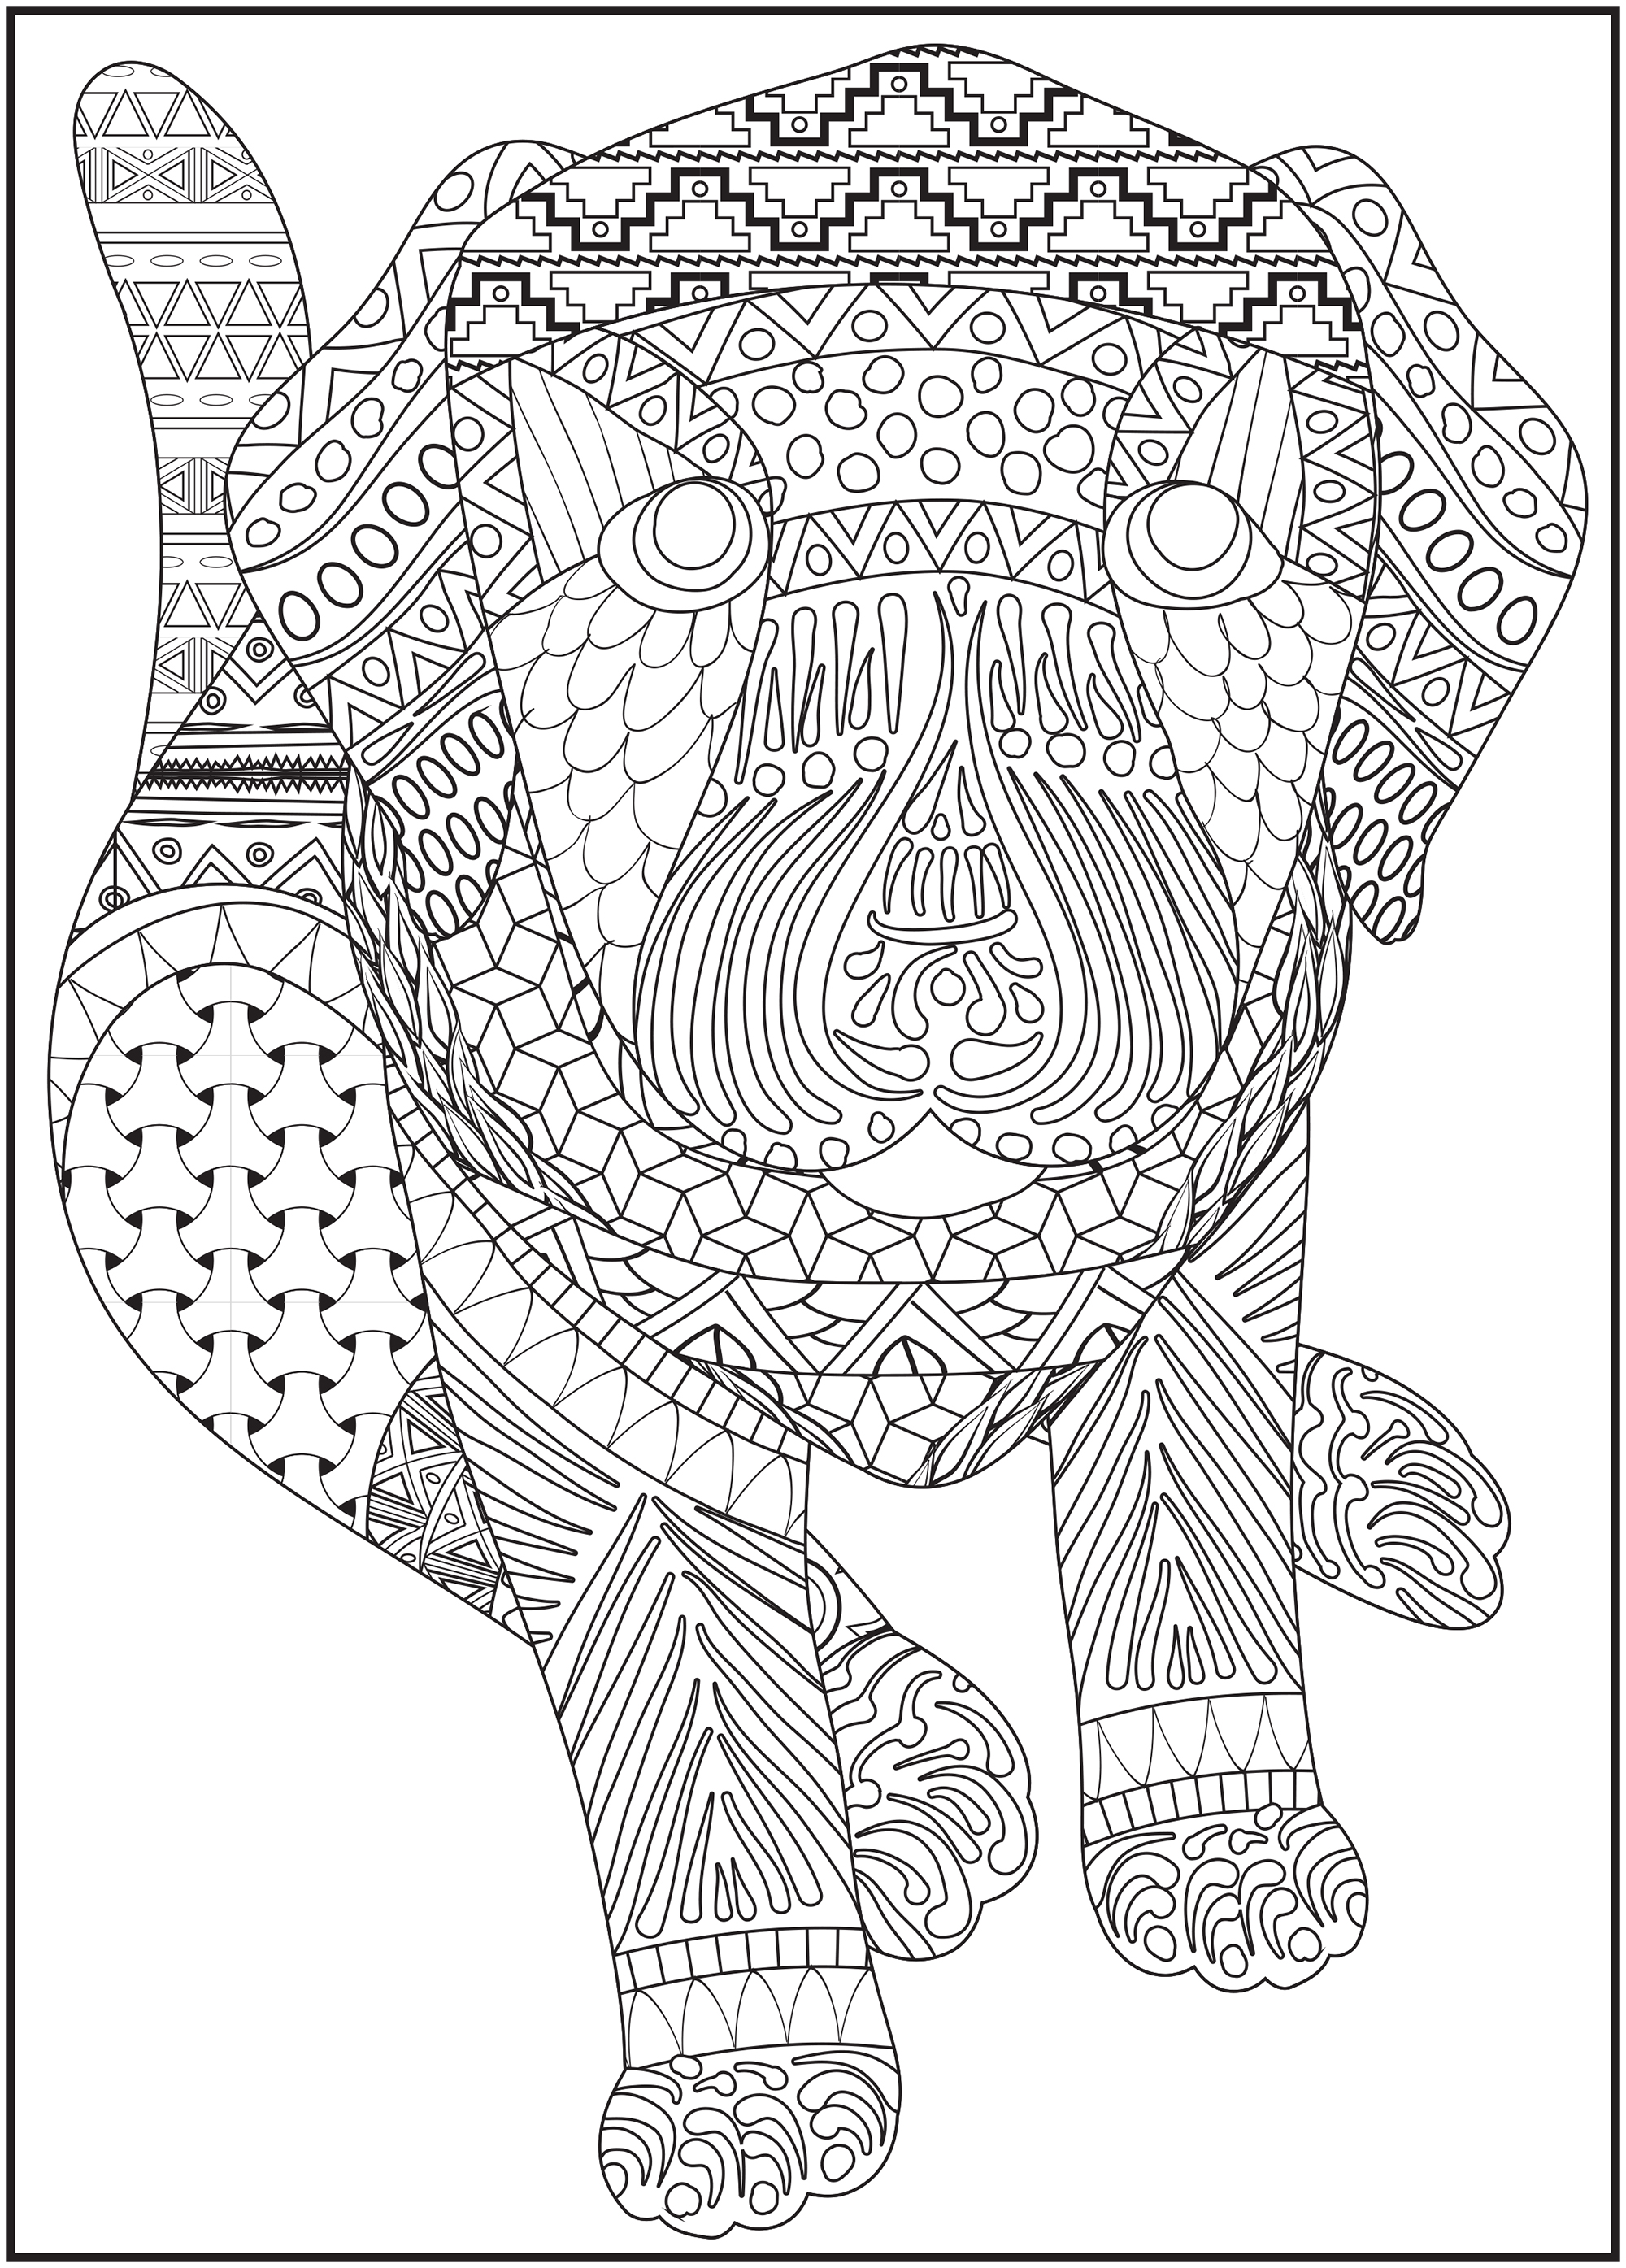 Cra-Z-Art Timeless Creations Adult Coloring Book, Wild at Heart, 64 Pages - image 3 of 10